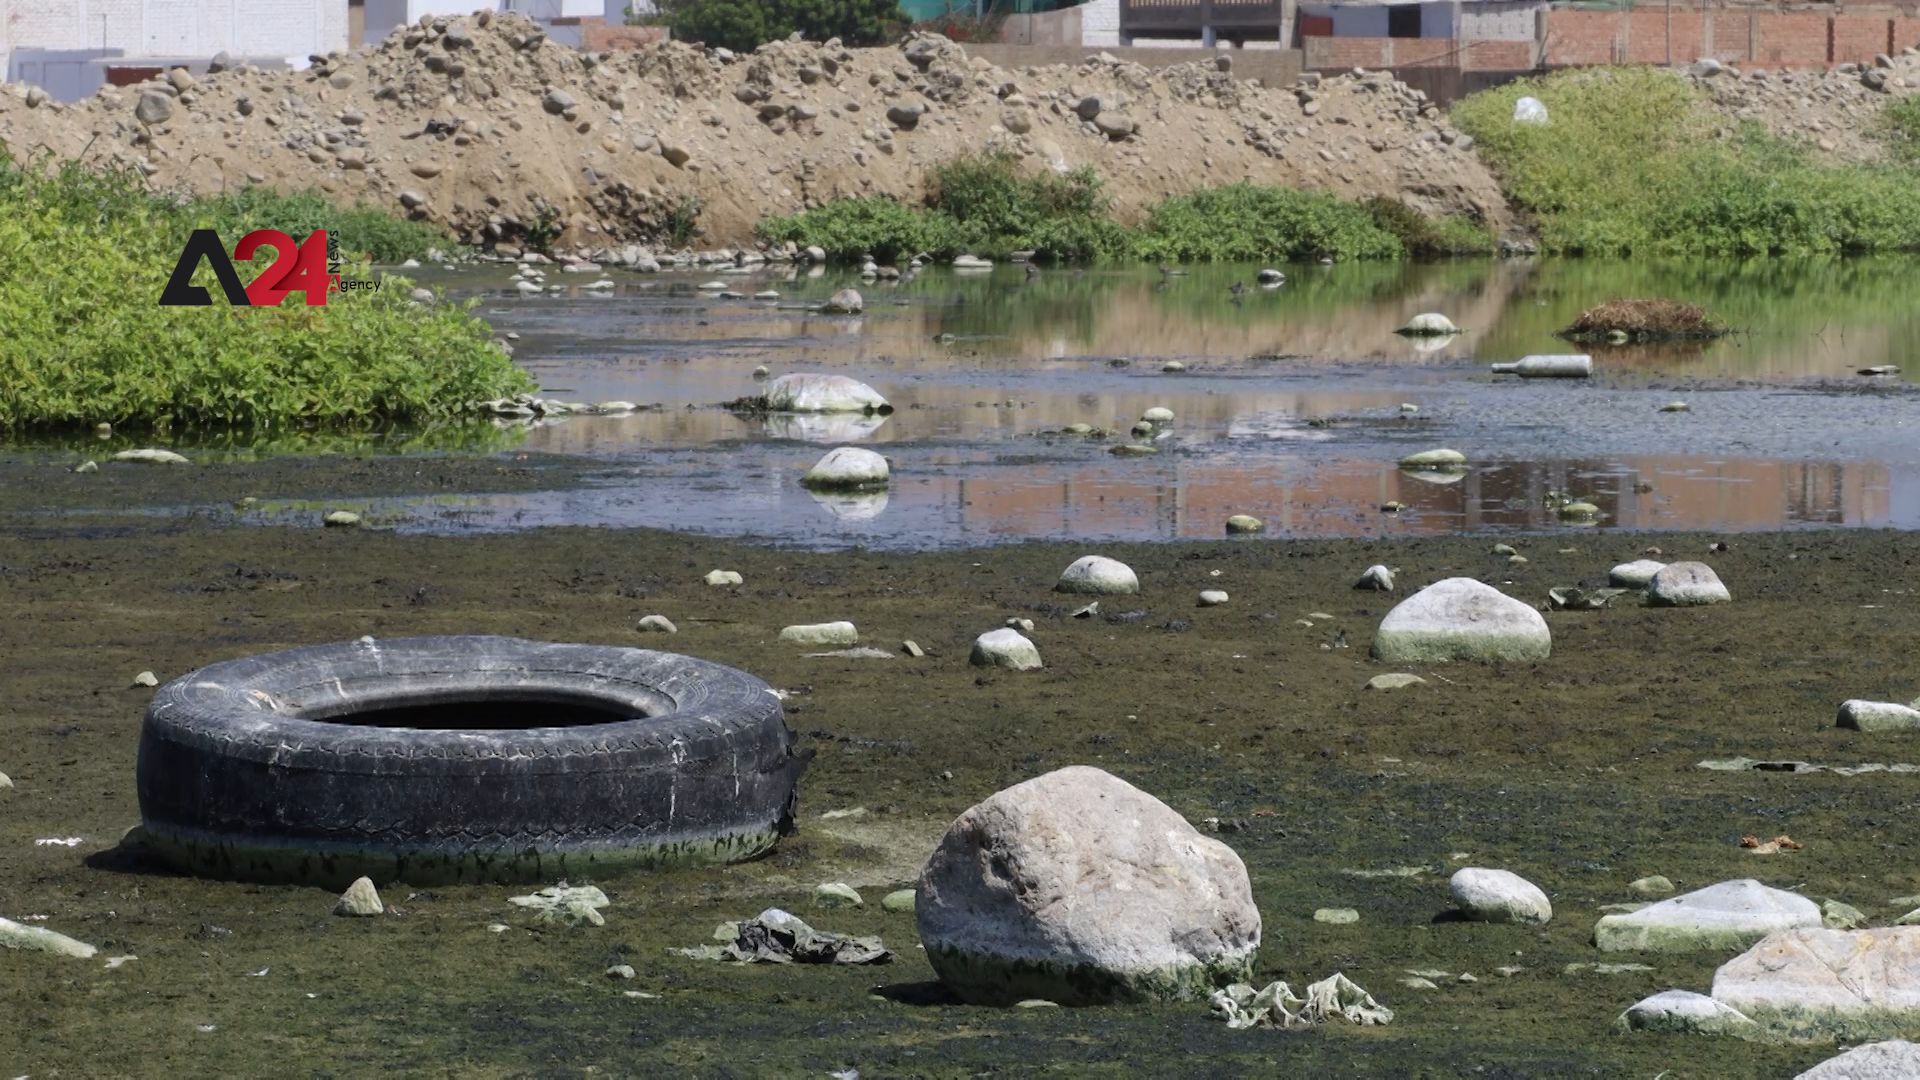 Peru-Water pollution adds to Peruvians’ financial hardship amid demands for action